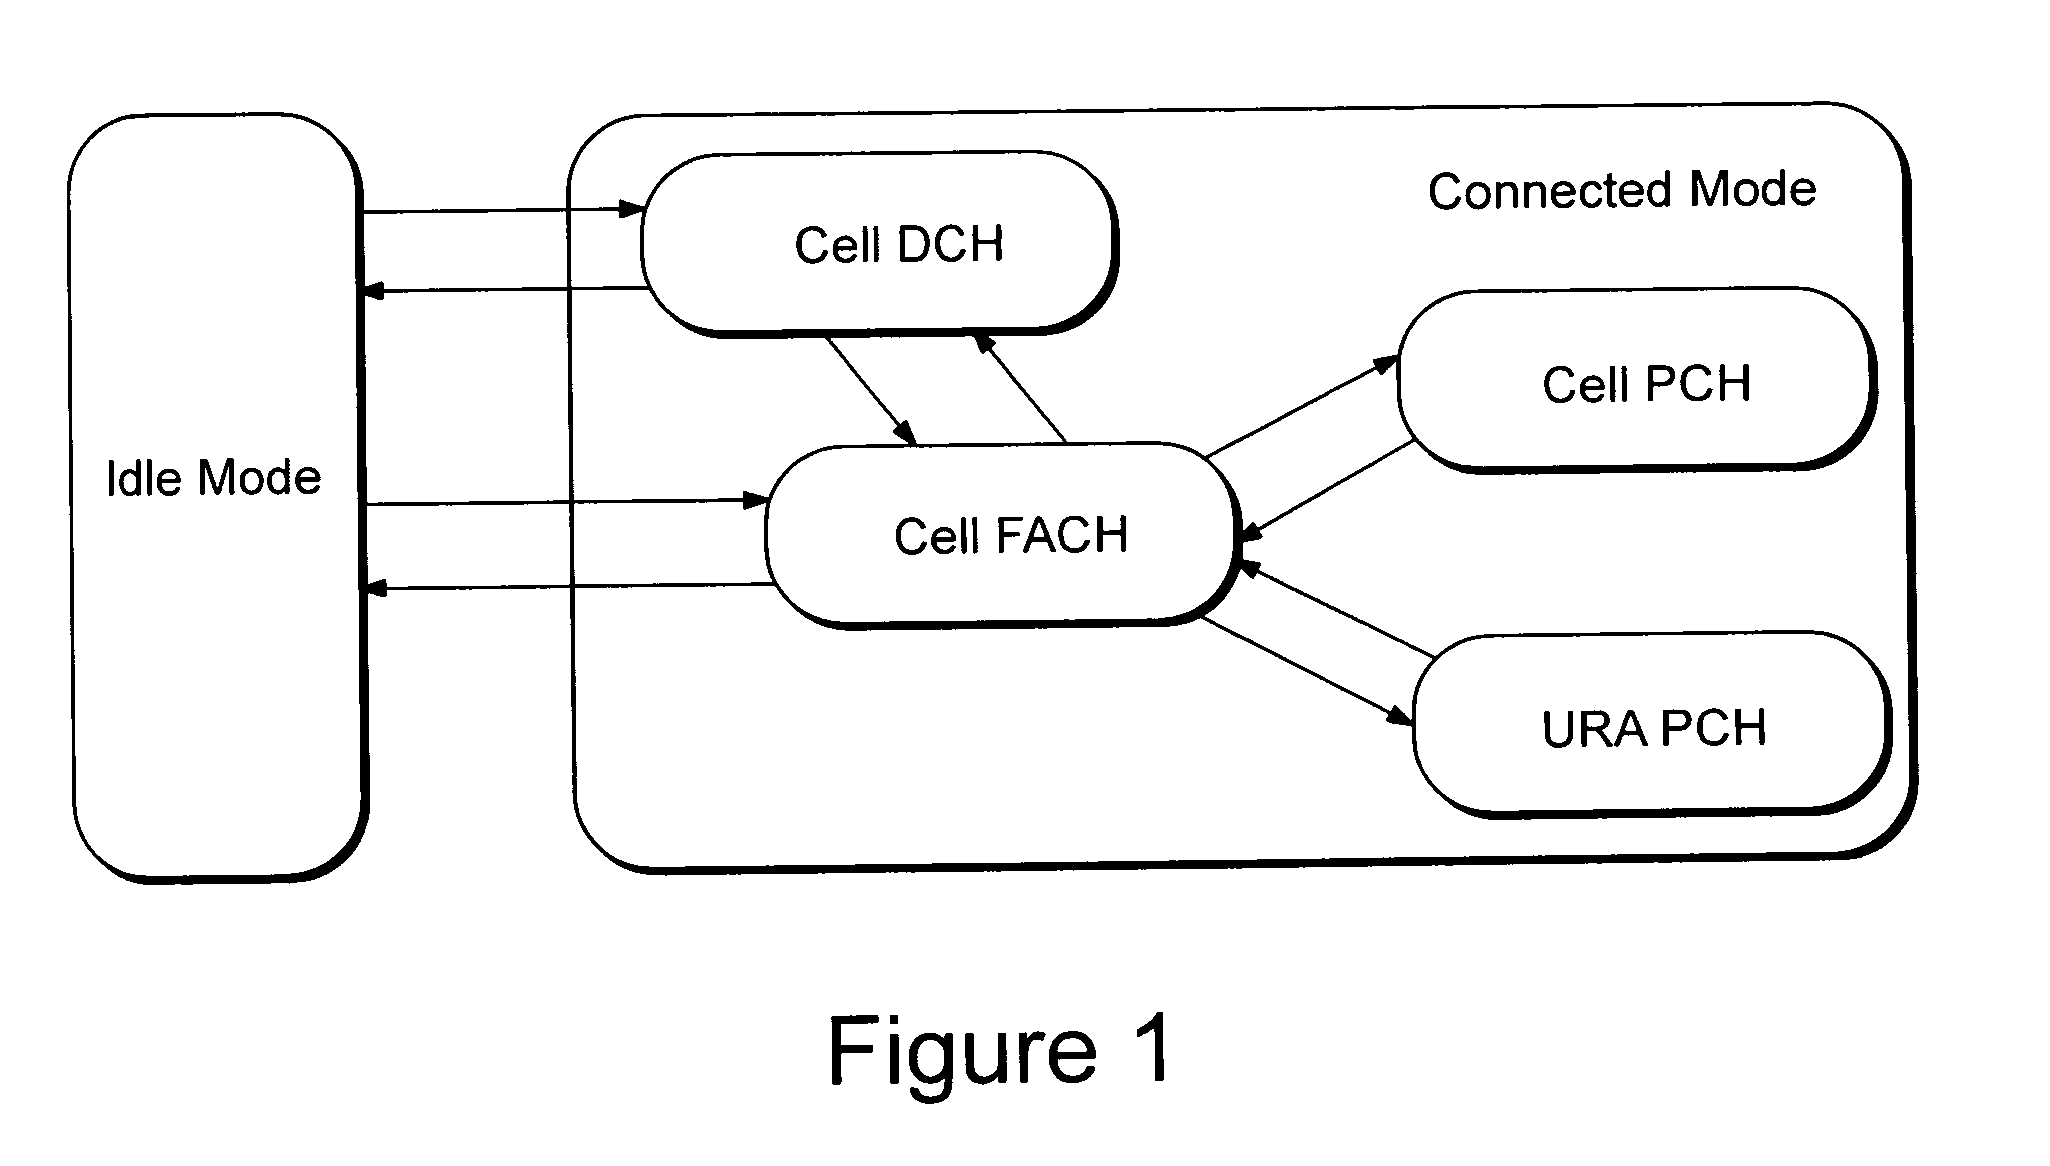 Managing uplink resources in a cellular radio communications system